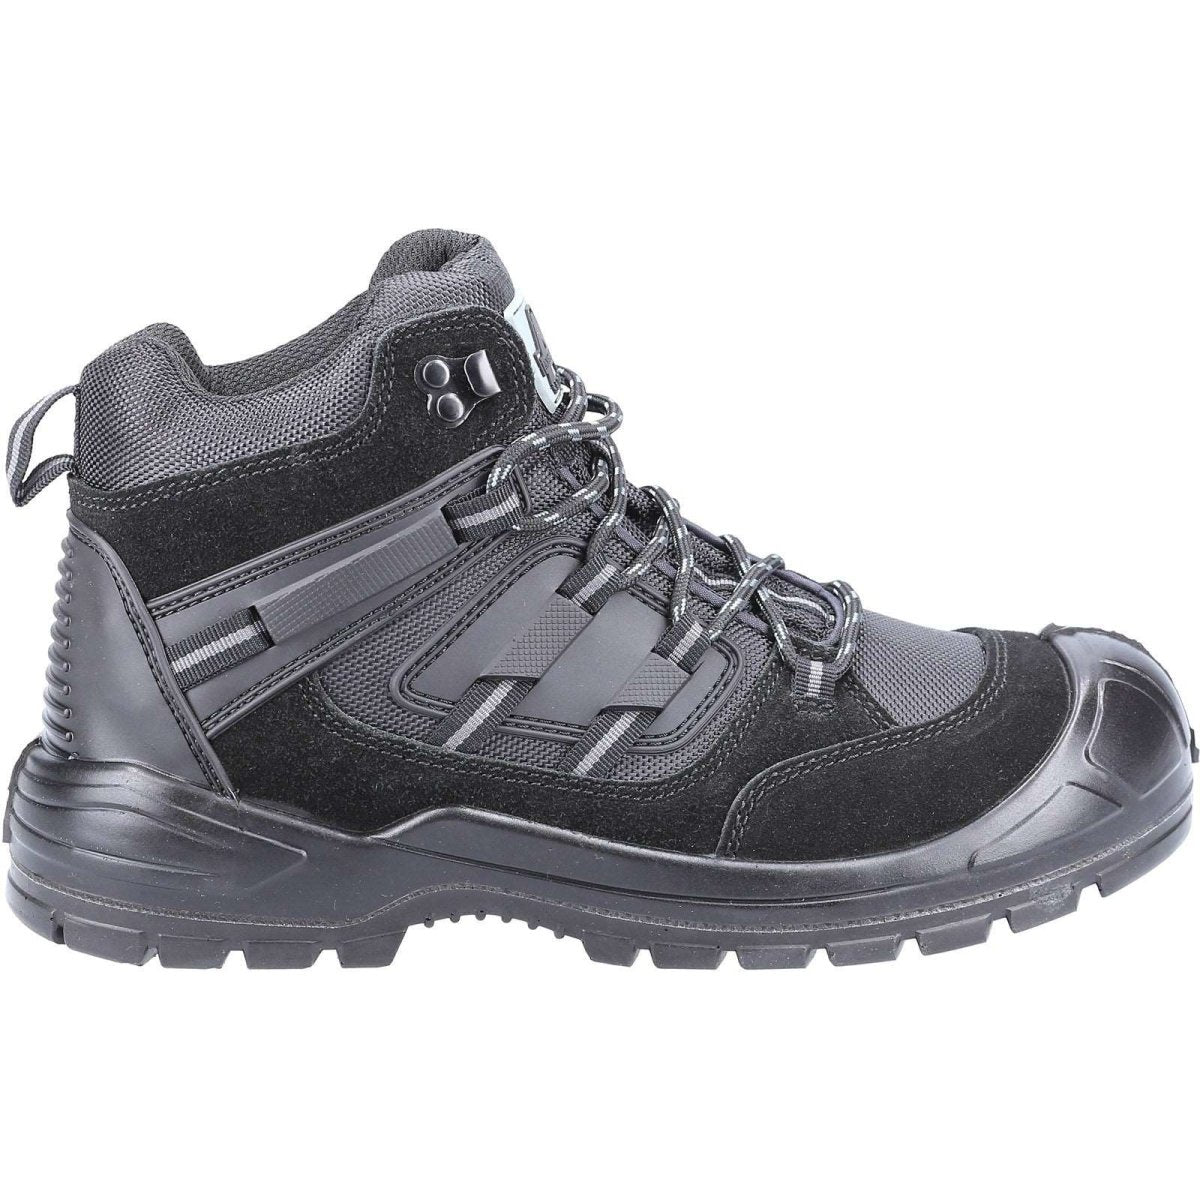 Amblers AS257 Steel Toe Cap Lightweight Mens Safety Hiker Boots - Shoe Store Direct